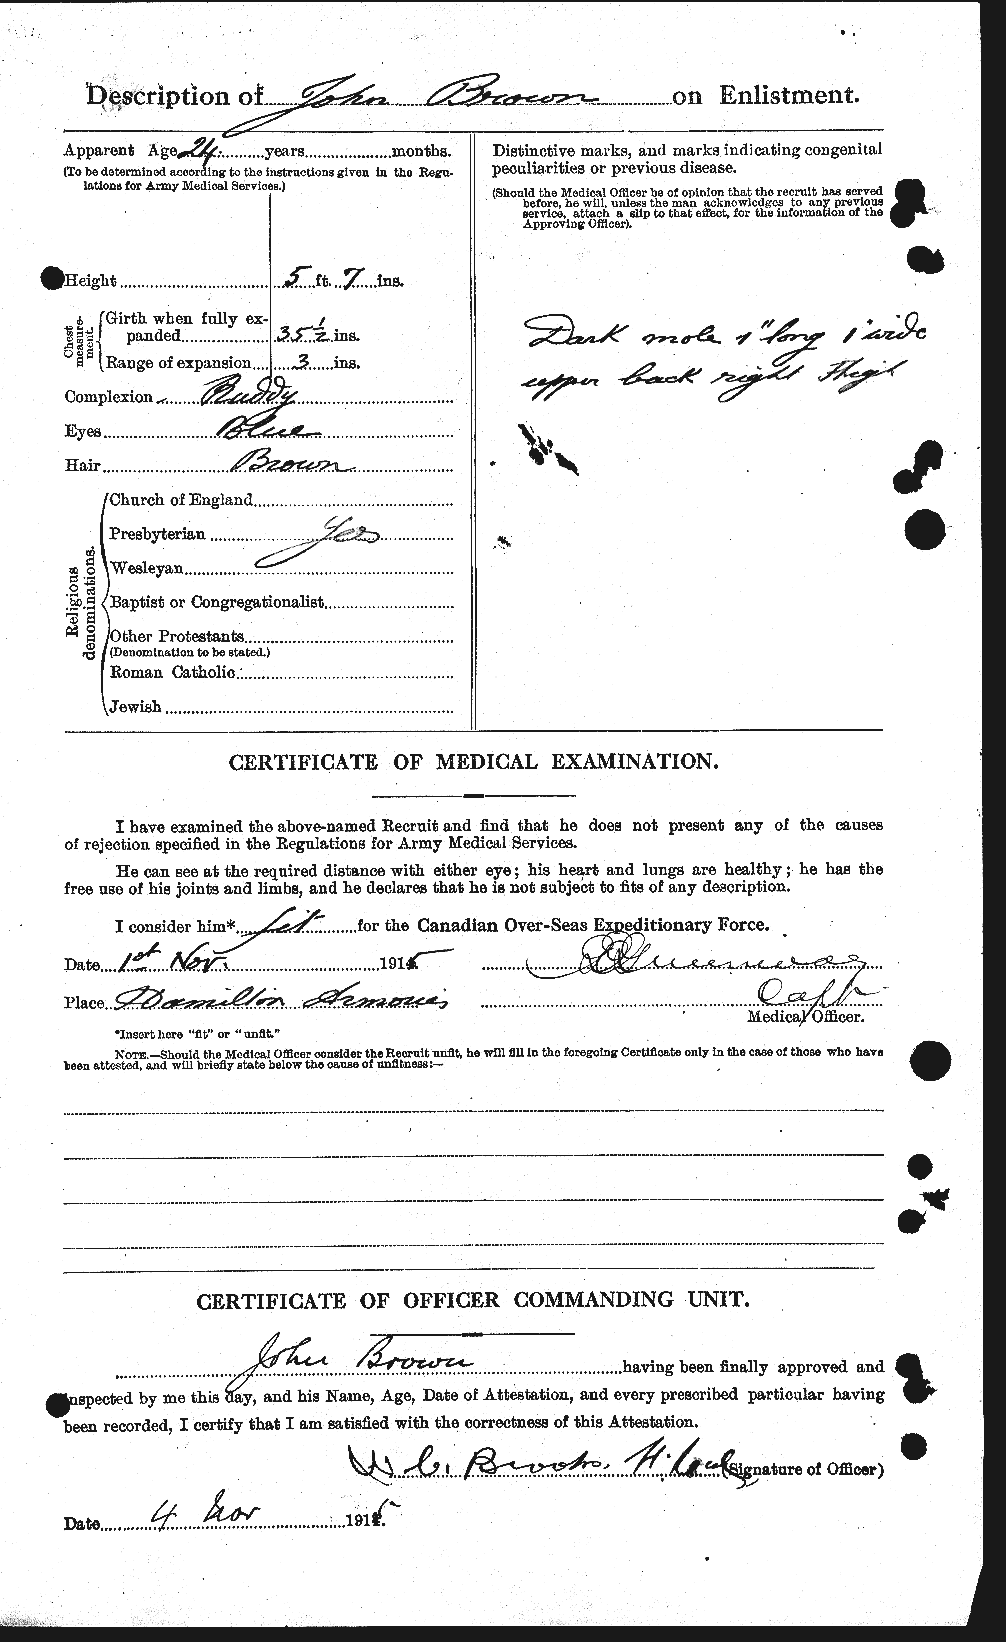 Personnel Records of the First World War - CEF 263893b